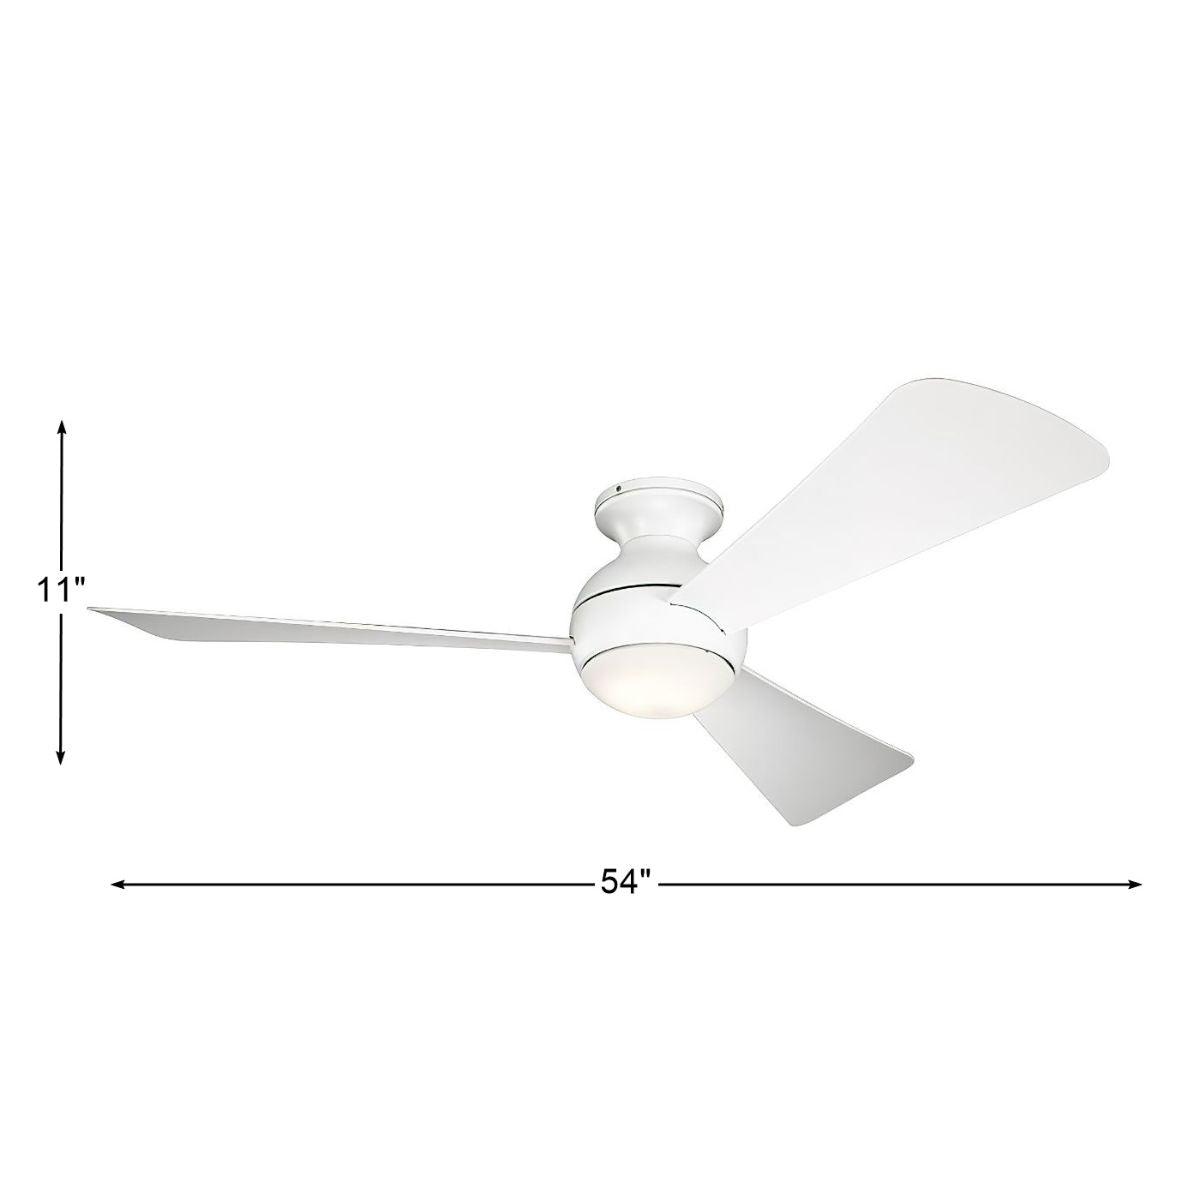 Sola 54 Inch Propeller Outdoor Ceiling Fan With Light, Wall Control Included